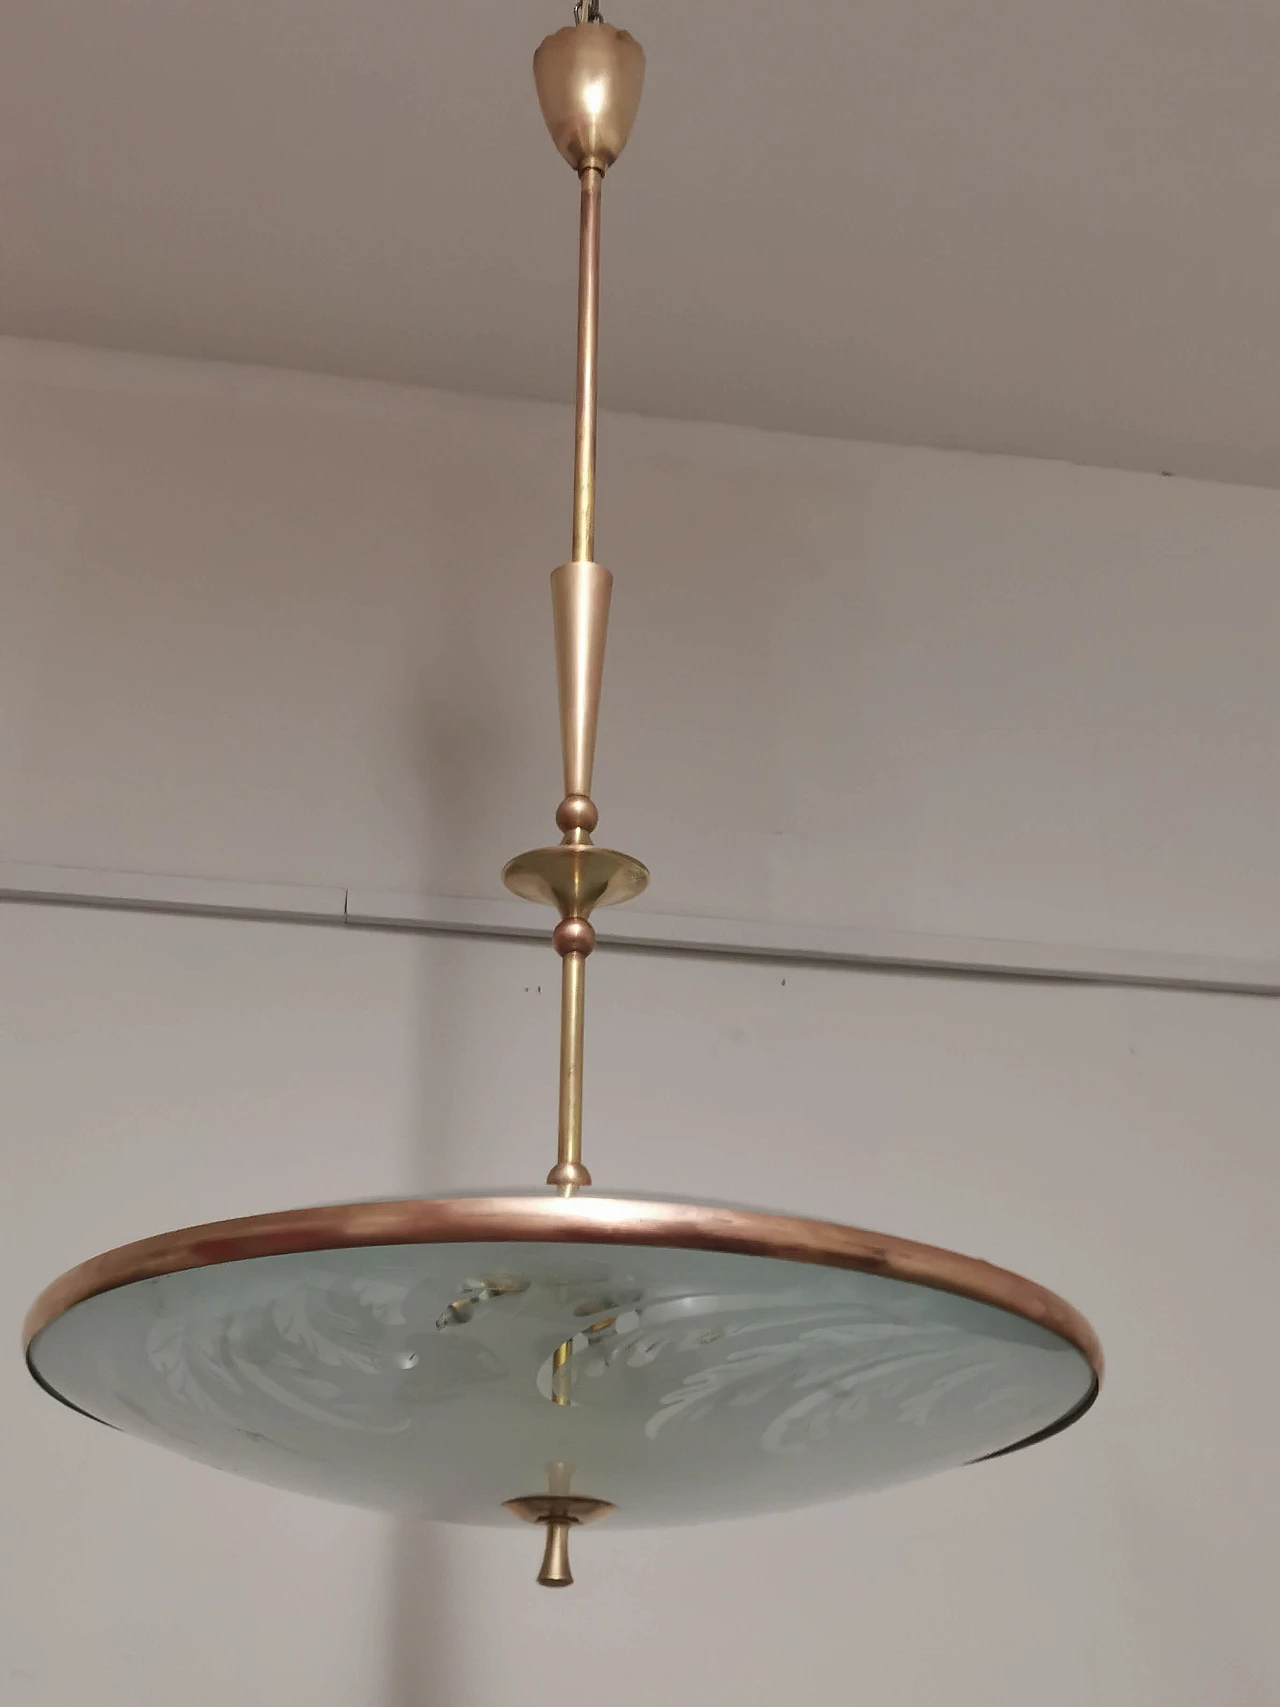 Suspension lamp by Pietro Chiesa for Fontana Arte, 1940s 1372280